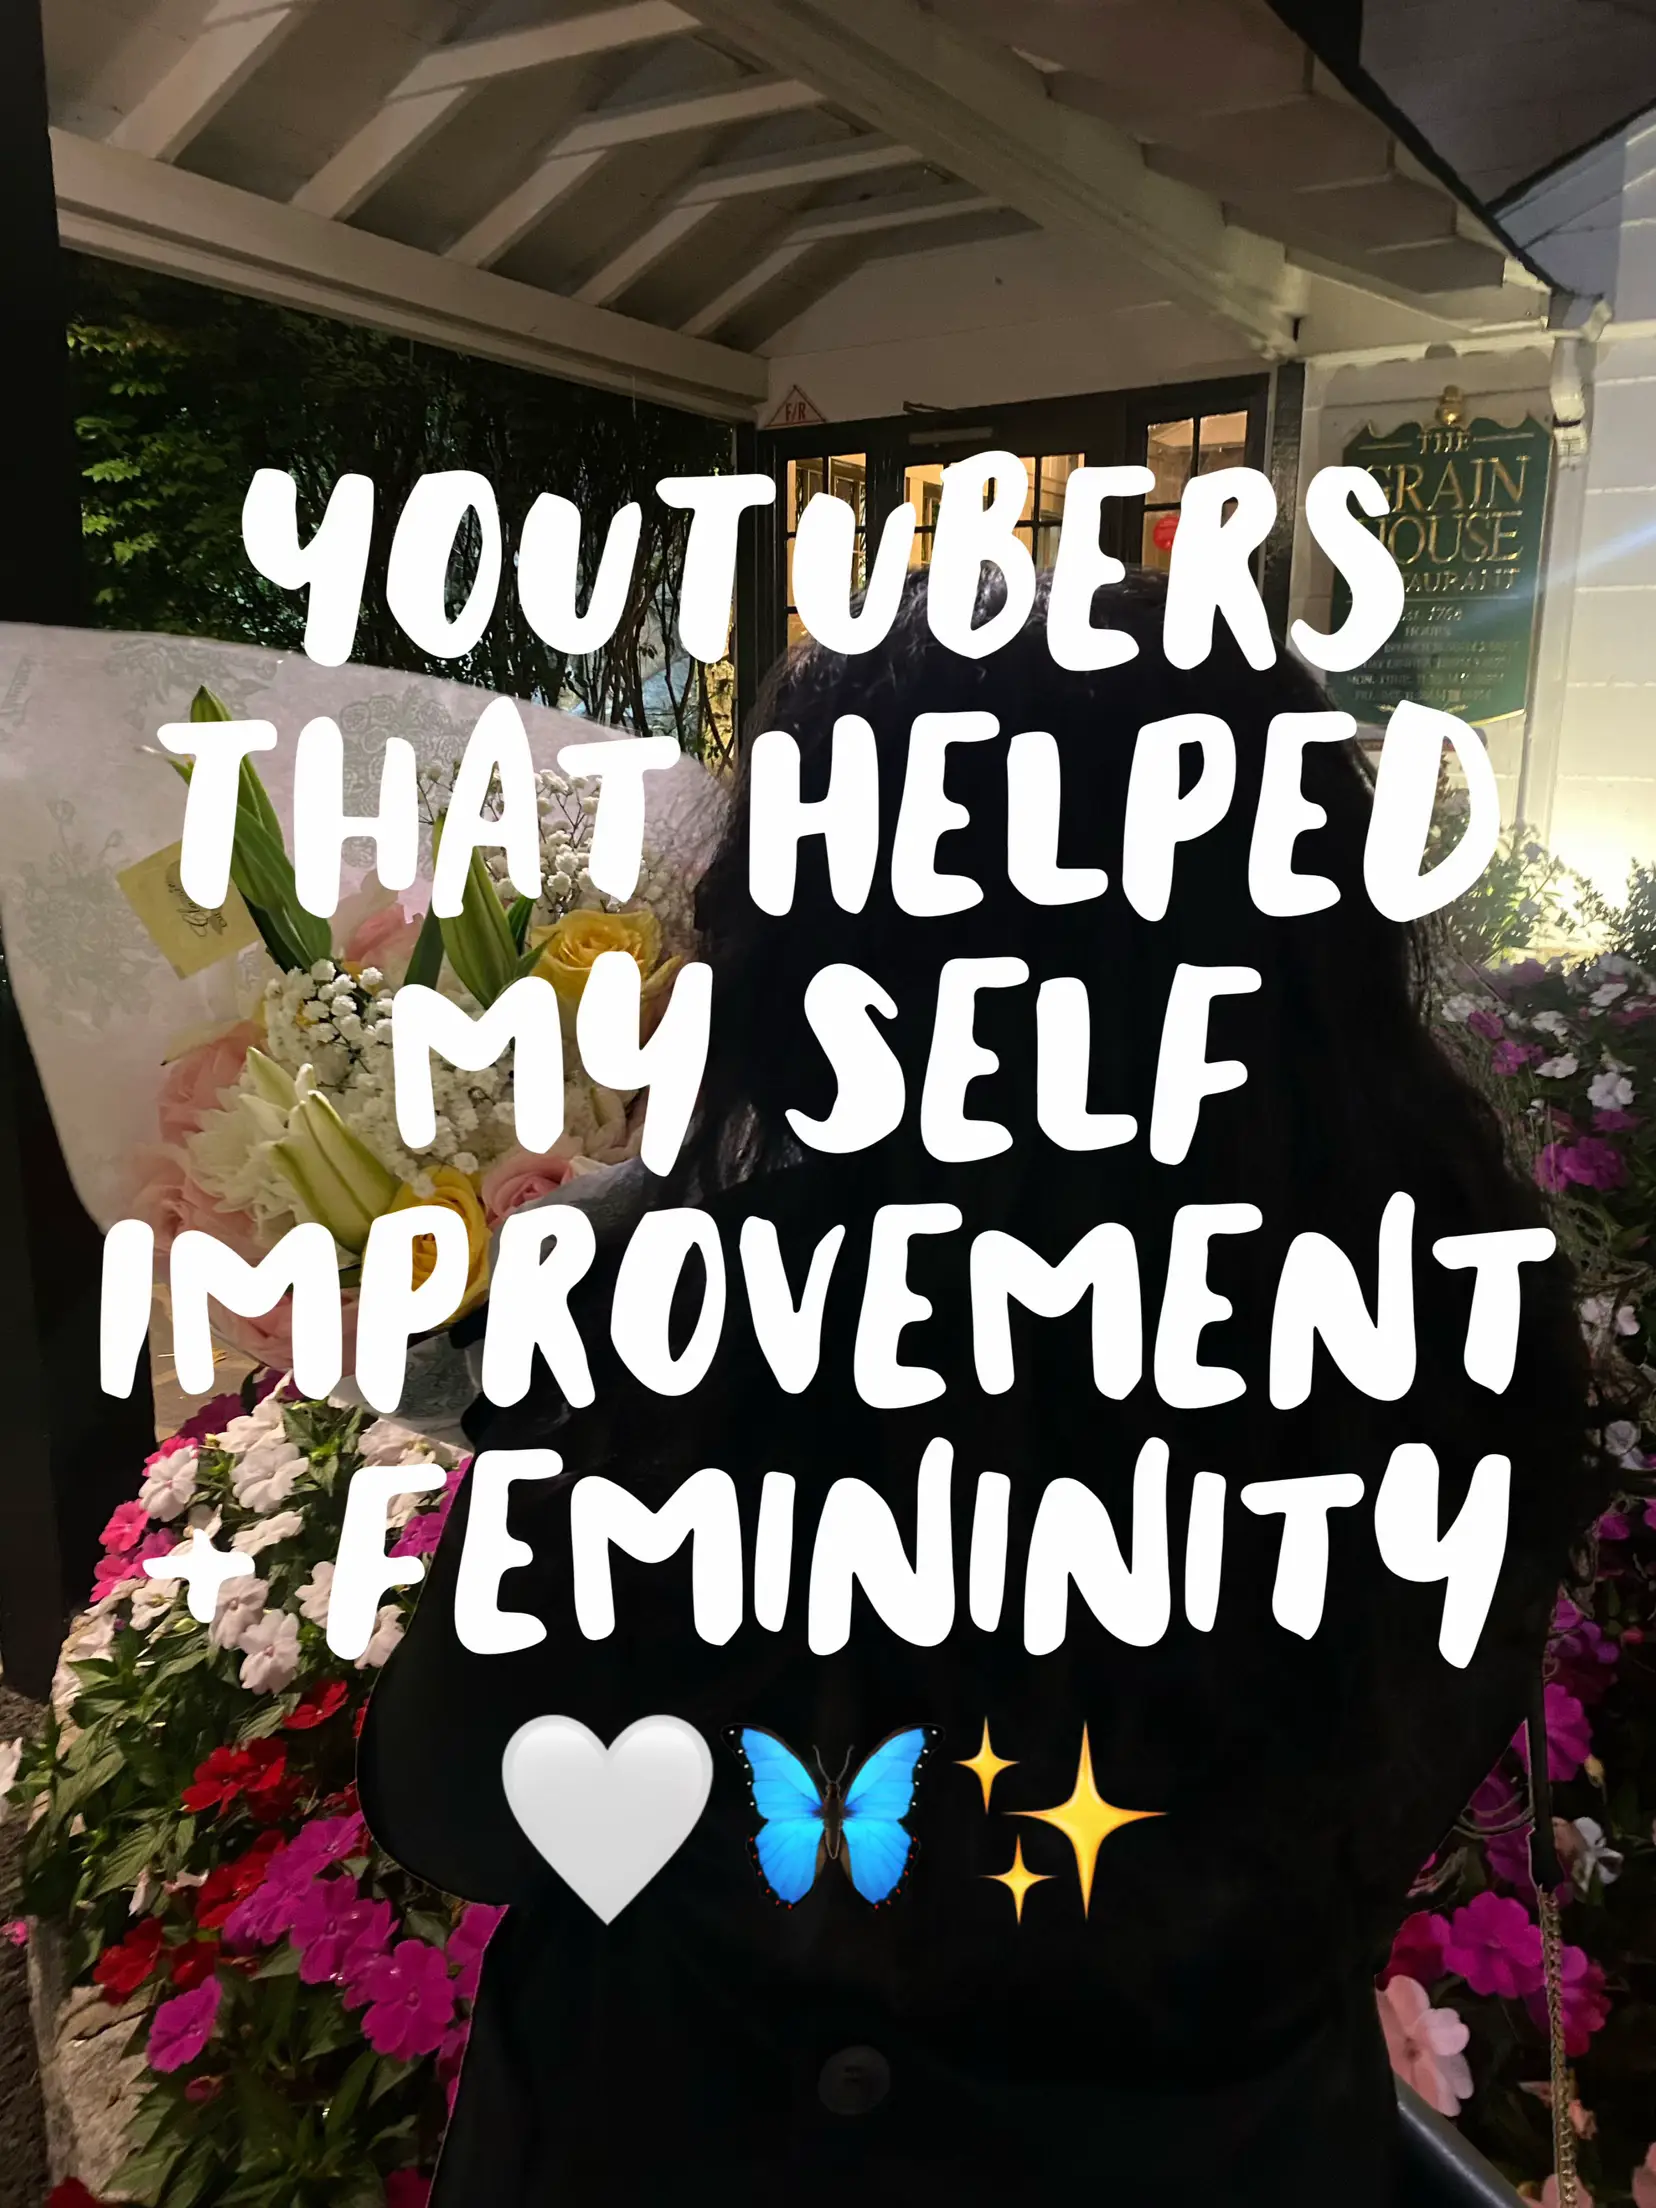  A person is standing in front of a flower arrangement. The words "Youtubers that helped my self improvement" are displayed above the person.